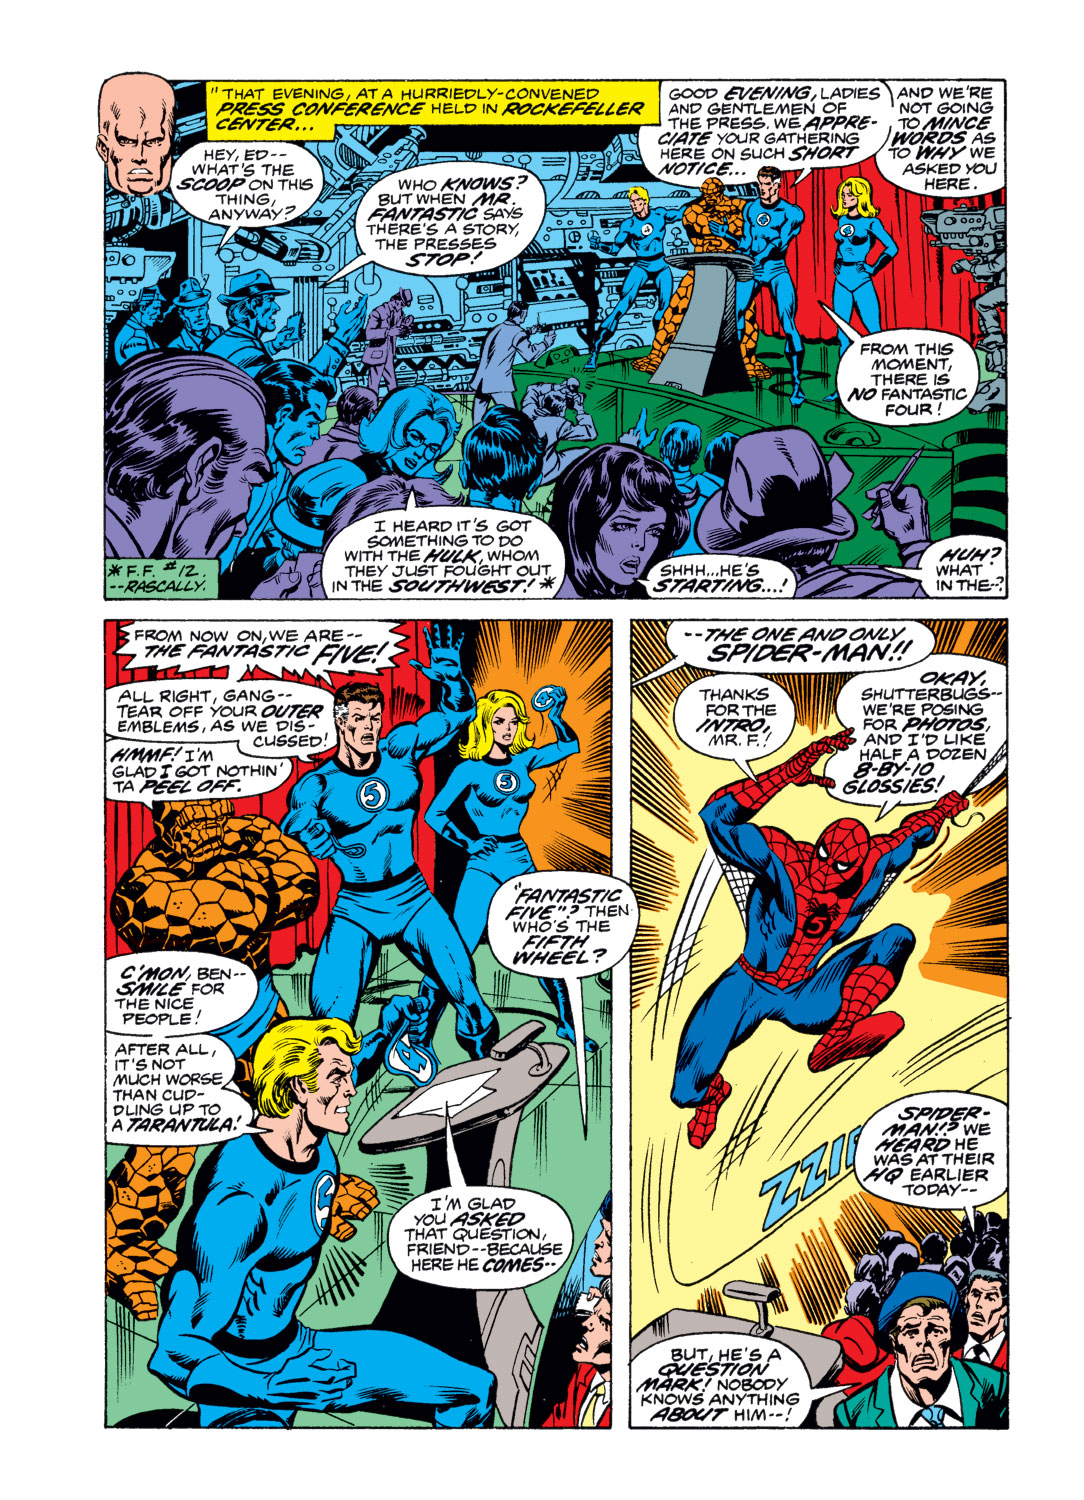 What If? (1977) issue 1 - Spider-Man joined the Fantastic Four - Page 13